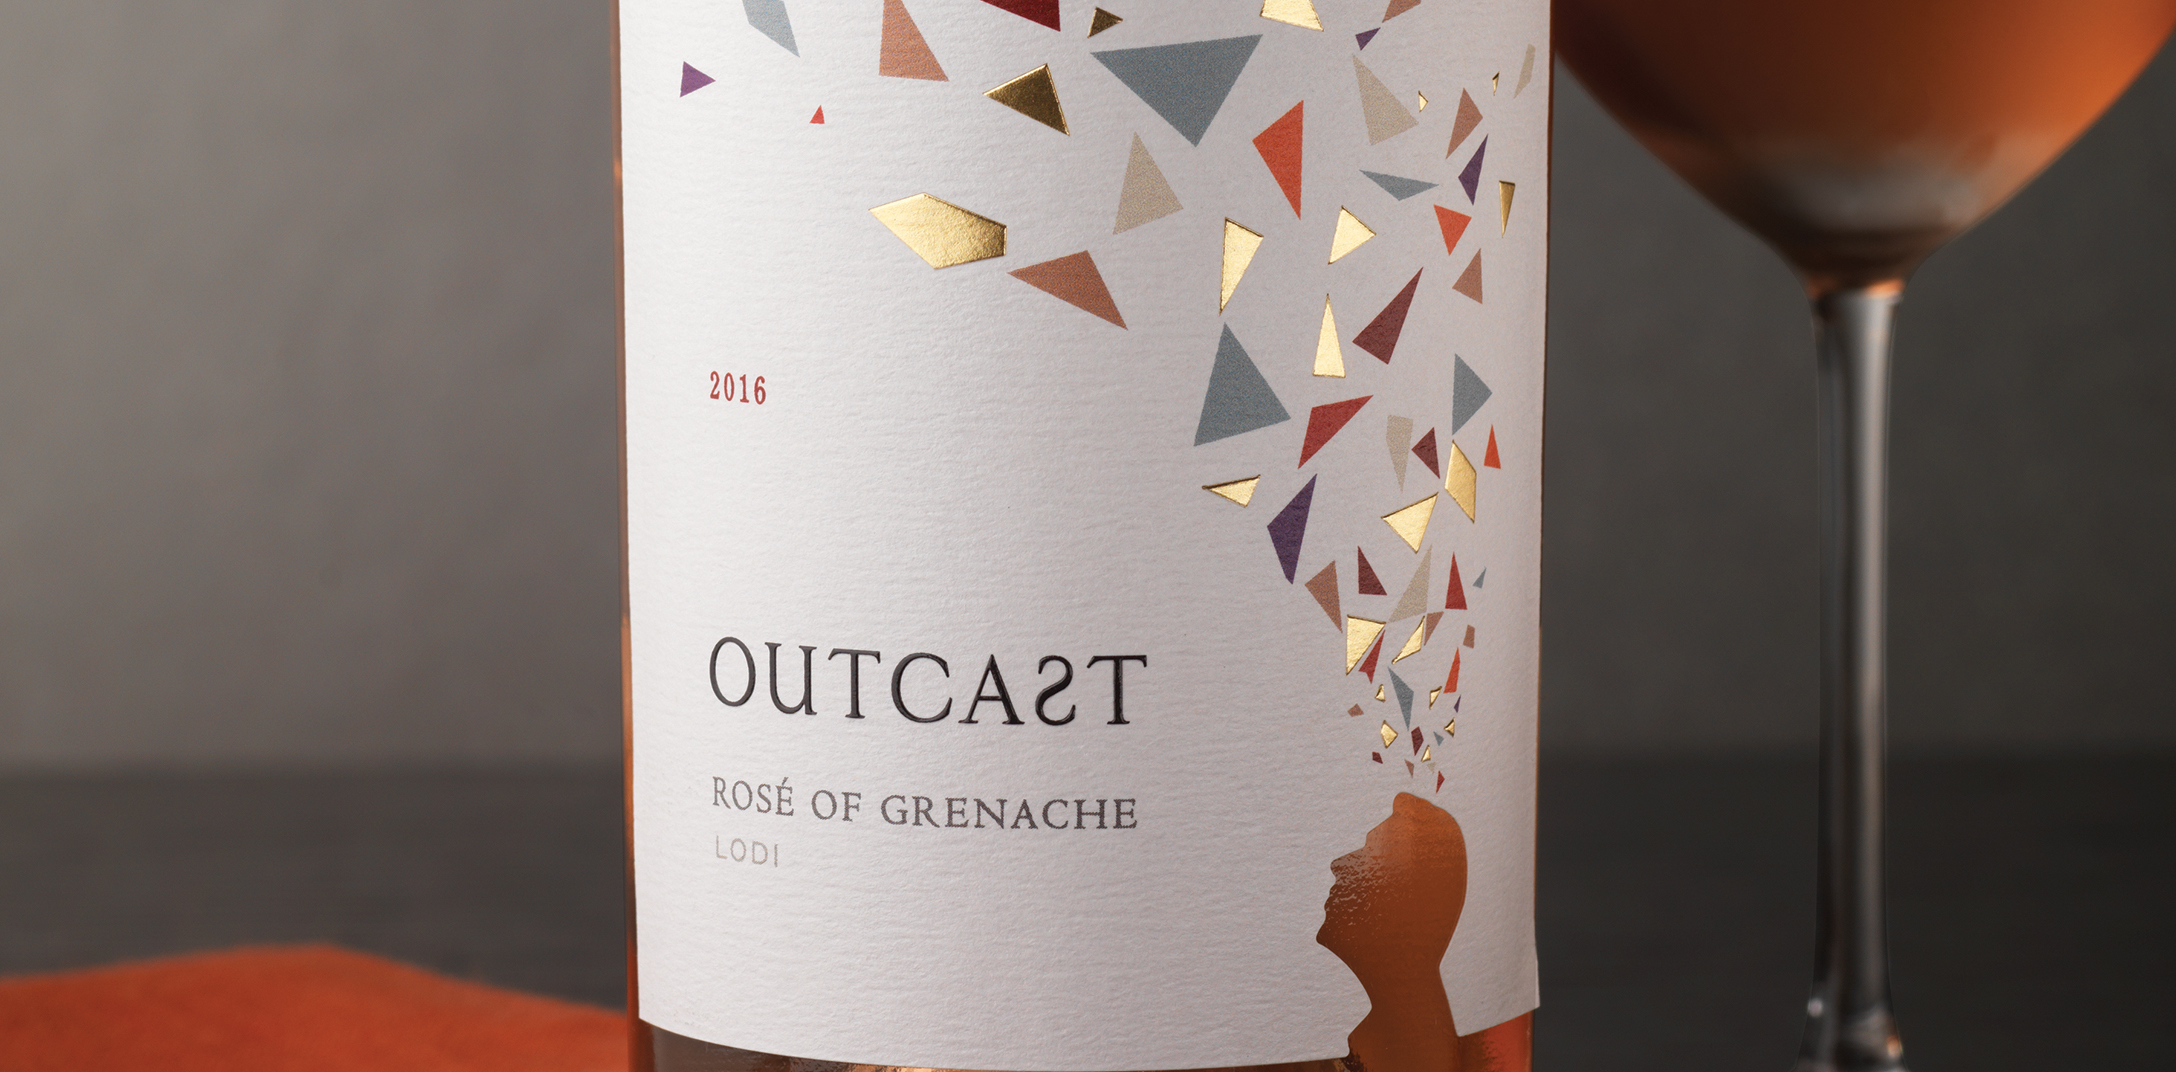 Outcast Wines